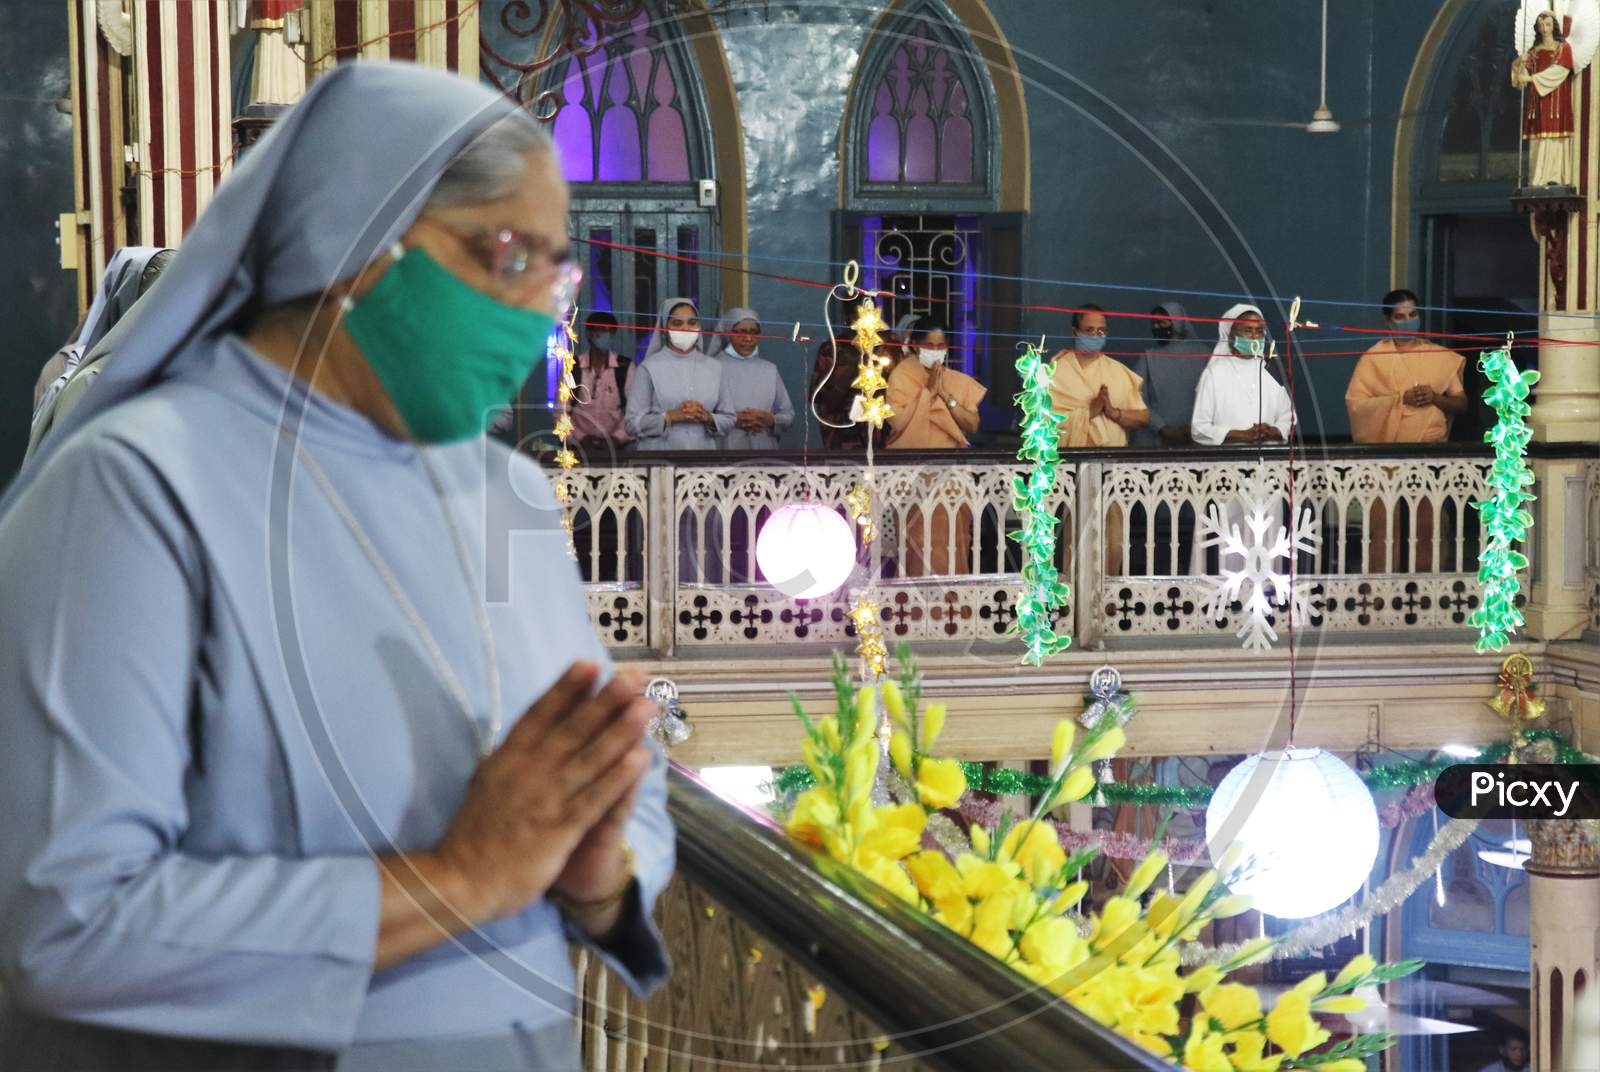 Nuns pray during mass inside a church as members of India's Christian community celebrate Christmas eve in Mumbai, India, December 24, 2020.